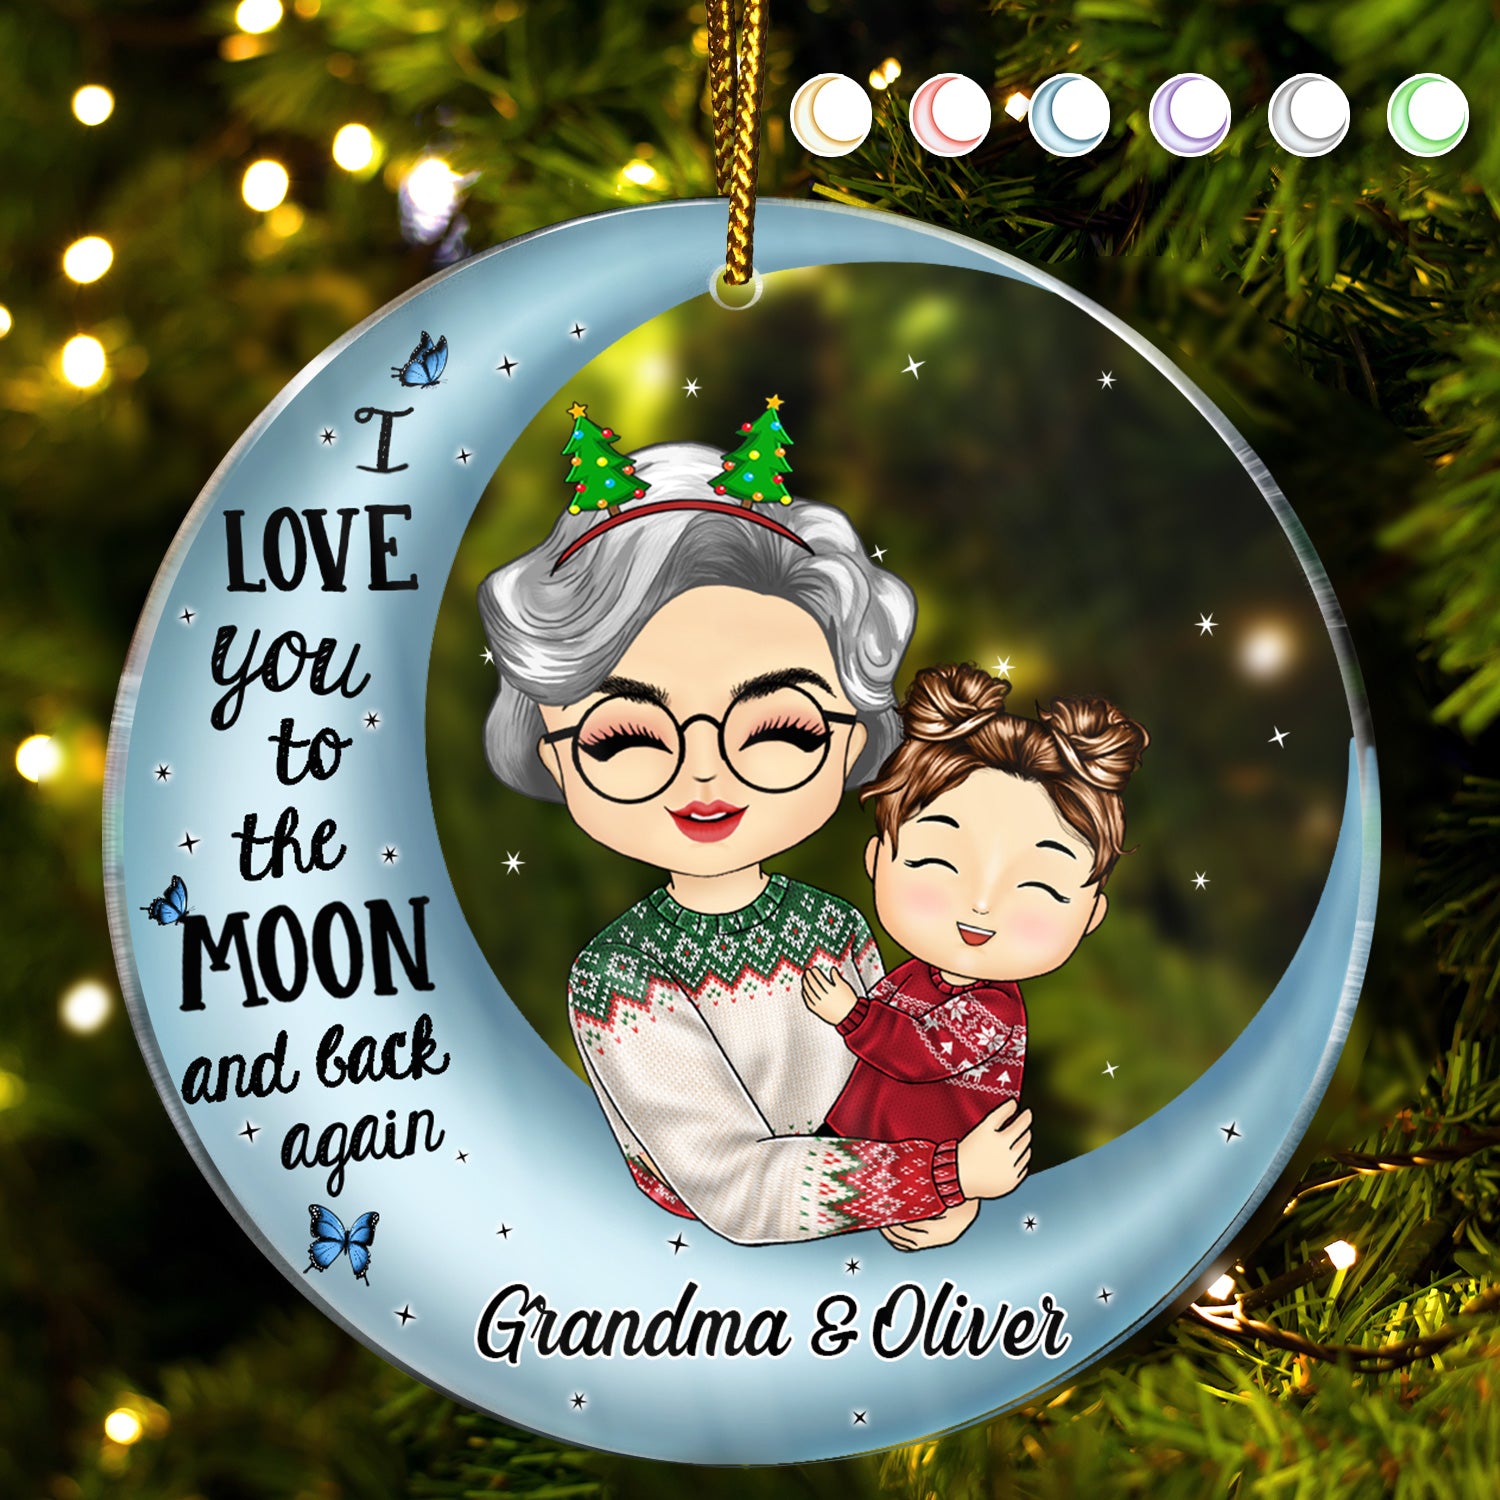 I Love You To The Moon And Back Grandma Mom - Christmas Gift For Grandmother, Mother, Grandkids - Personalized Circle Acrylic Ornament